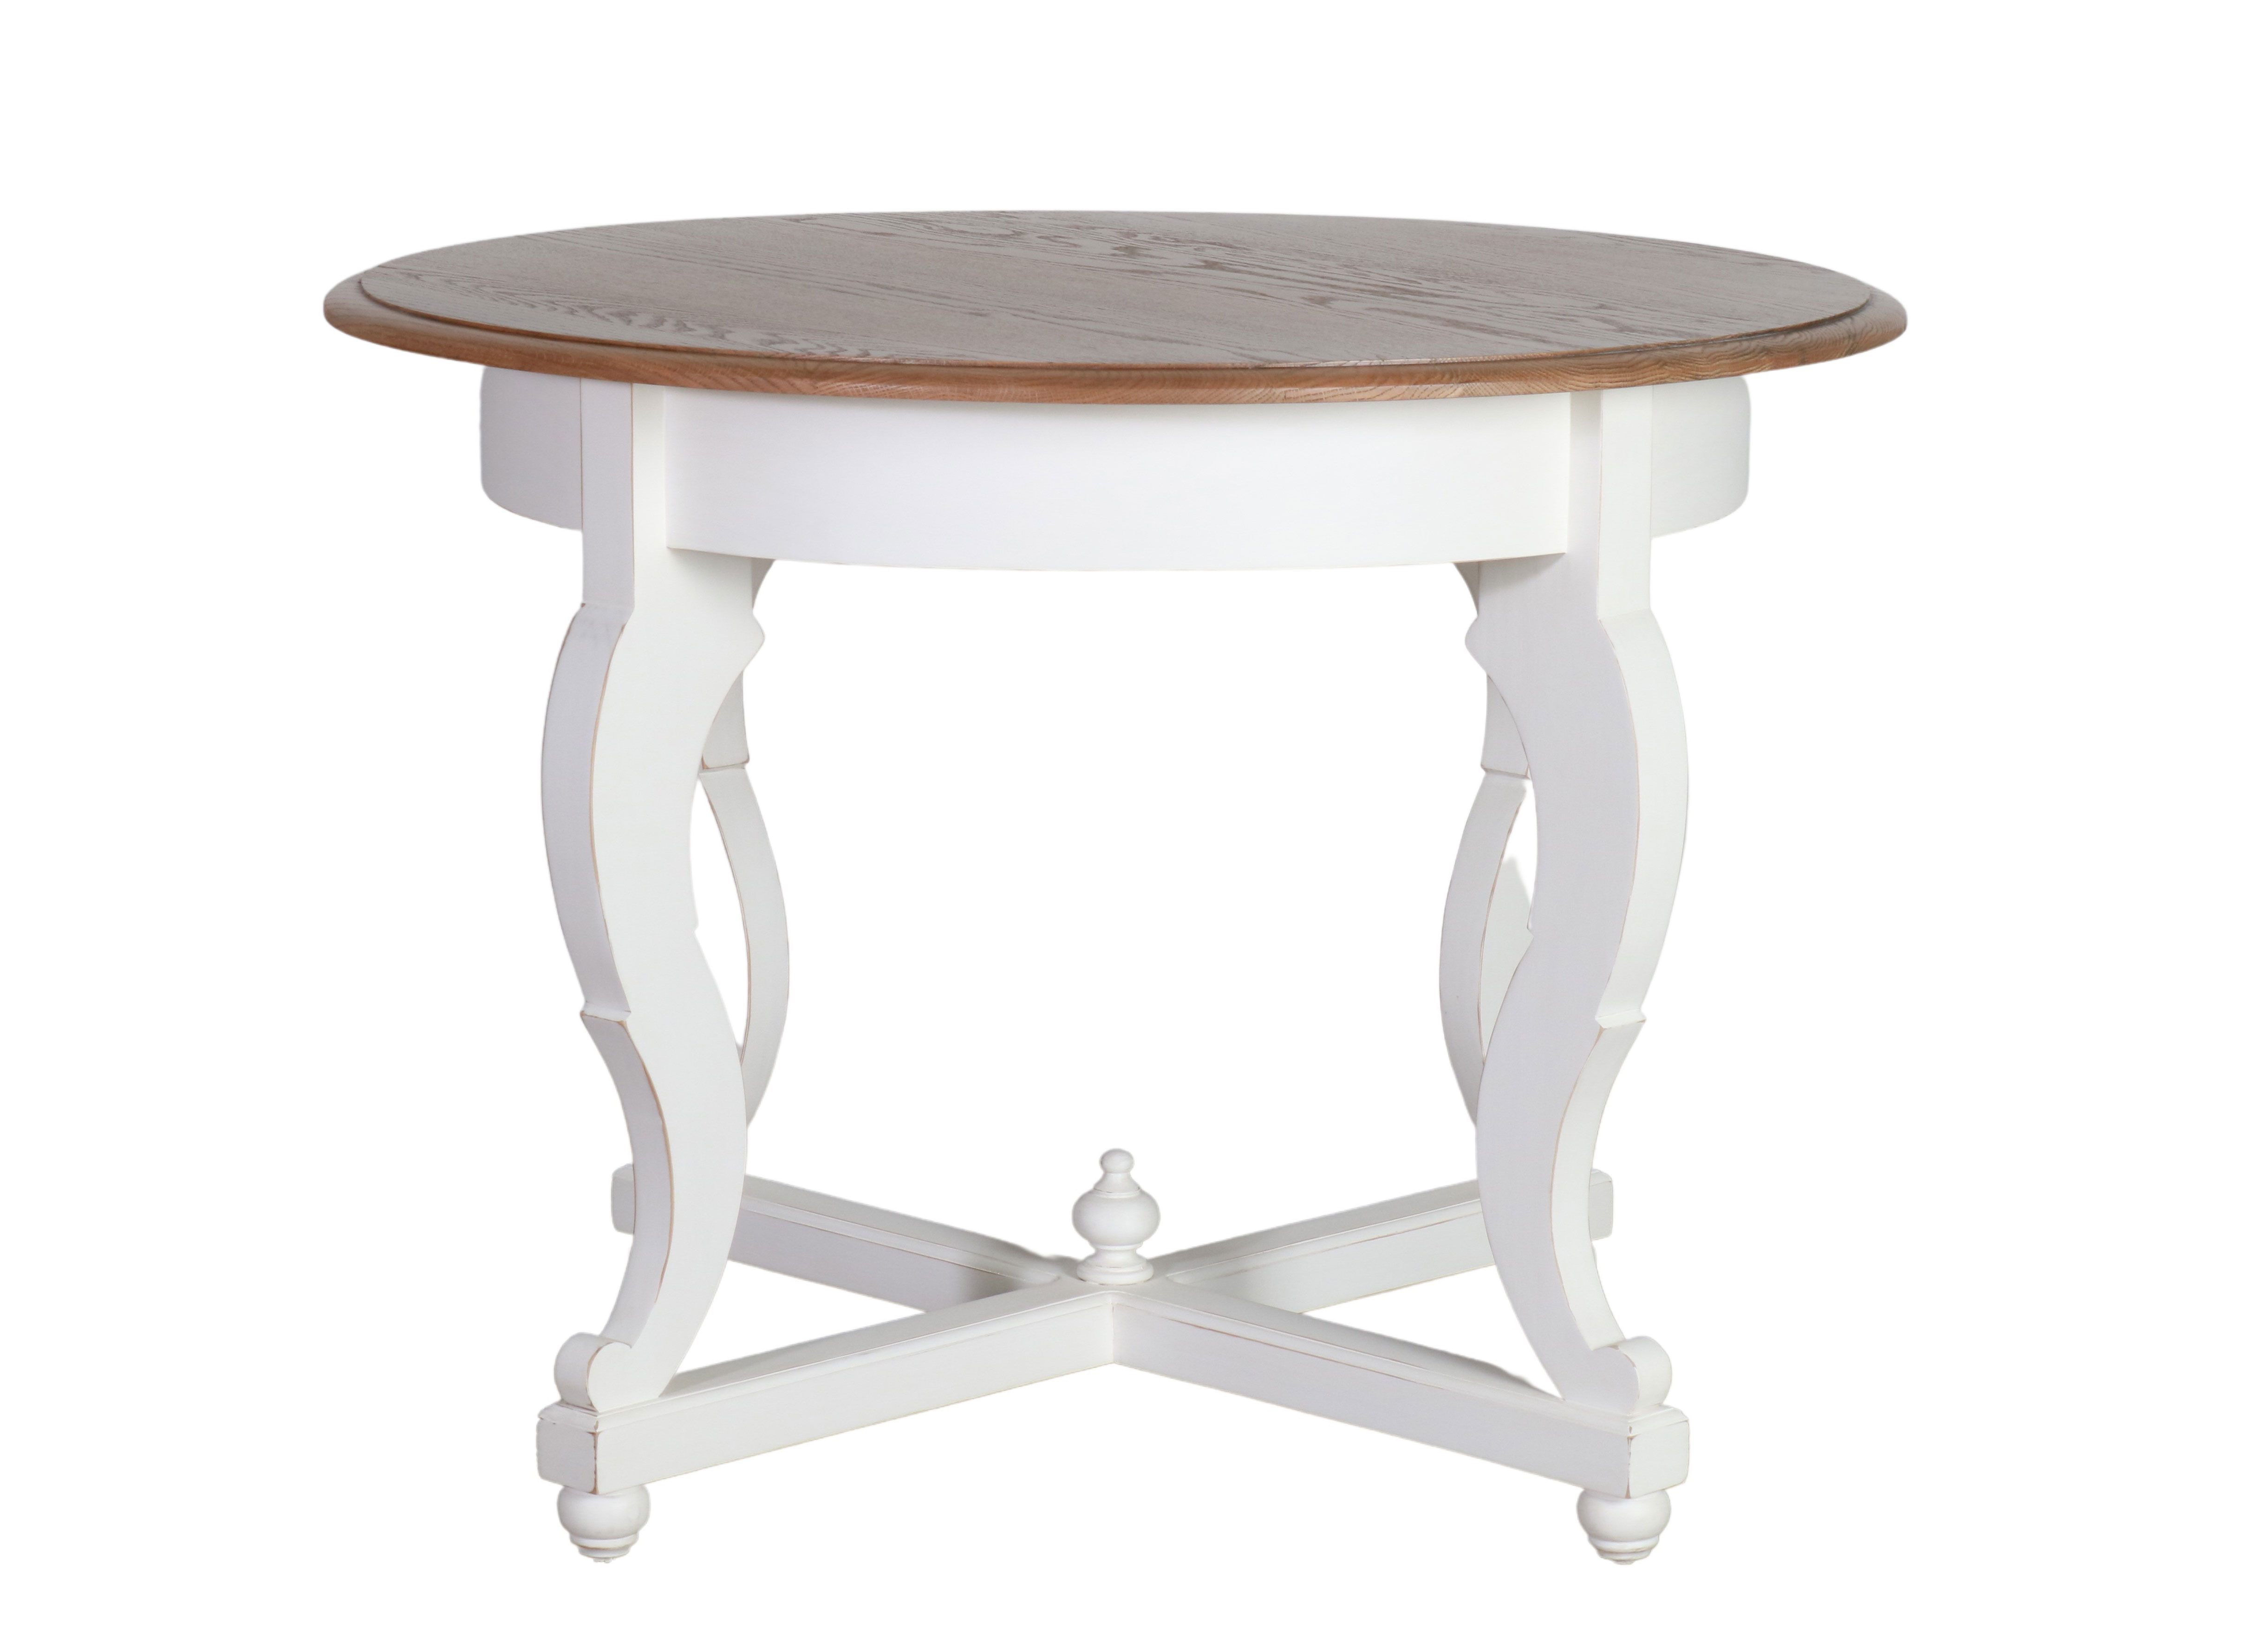 Montpellier Round Table in antique white base and weathered oak top